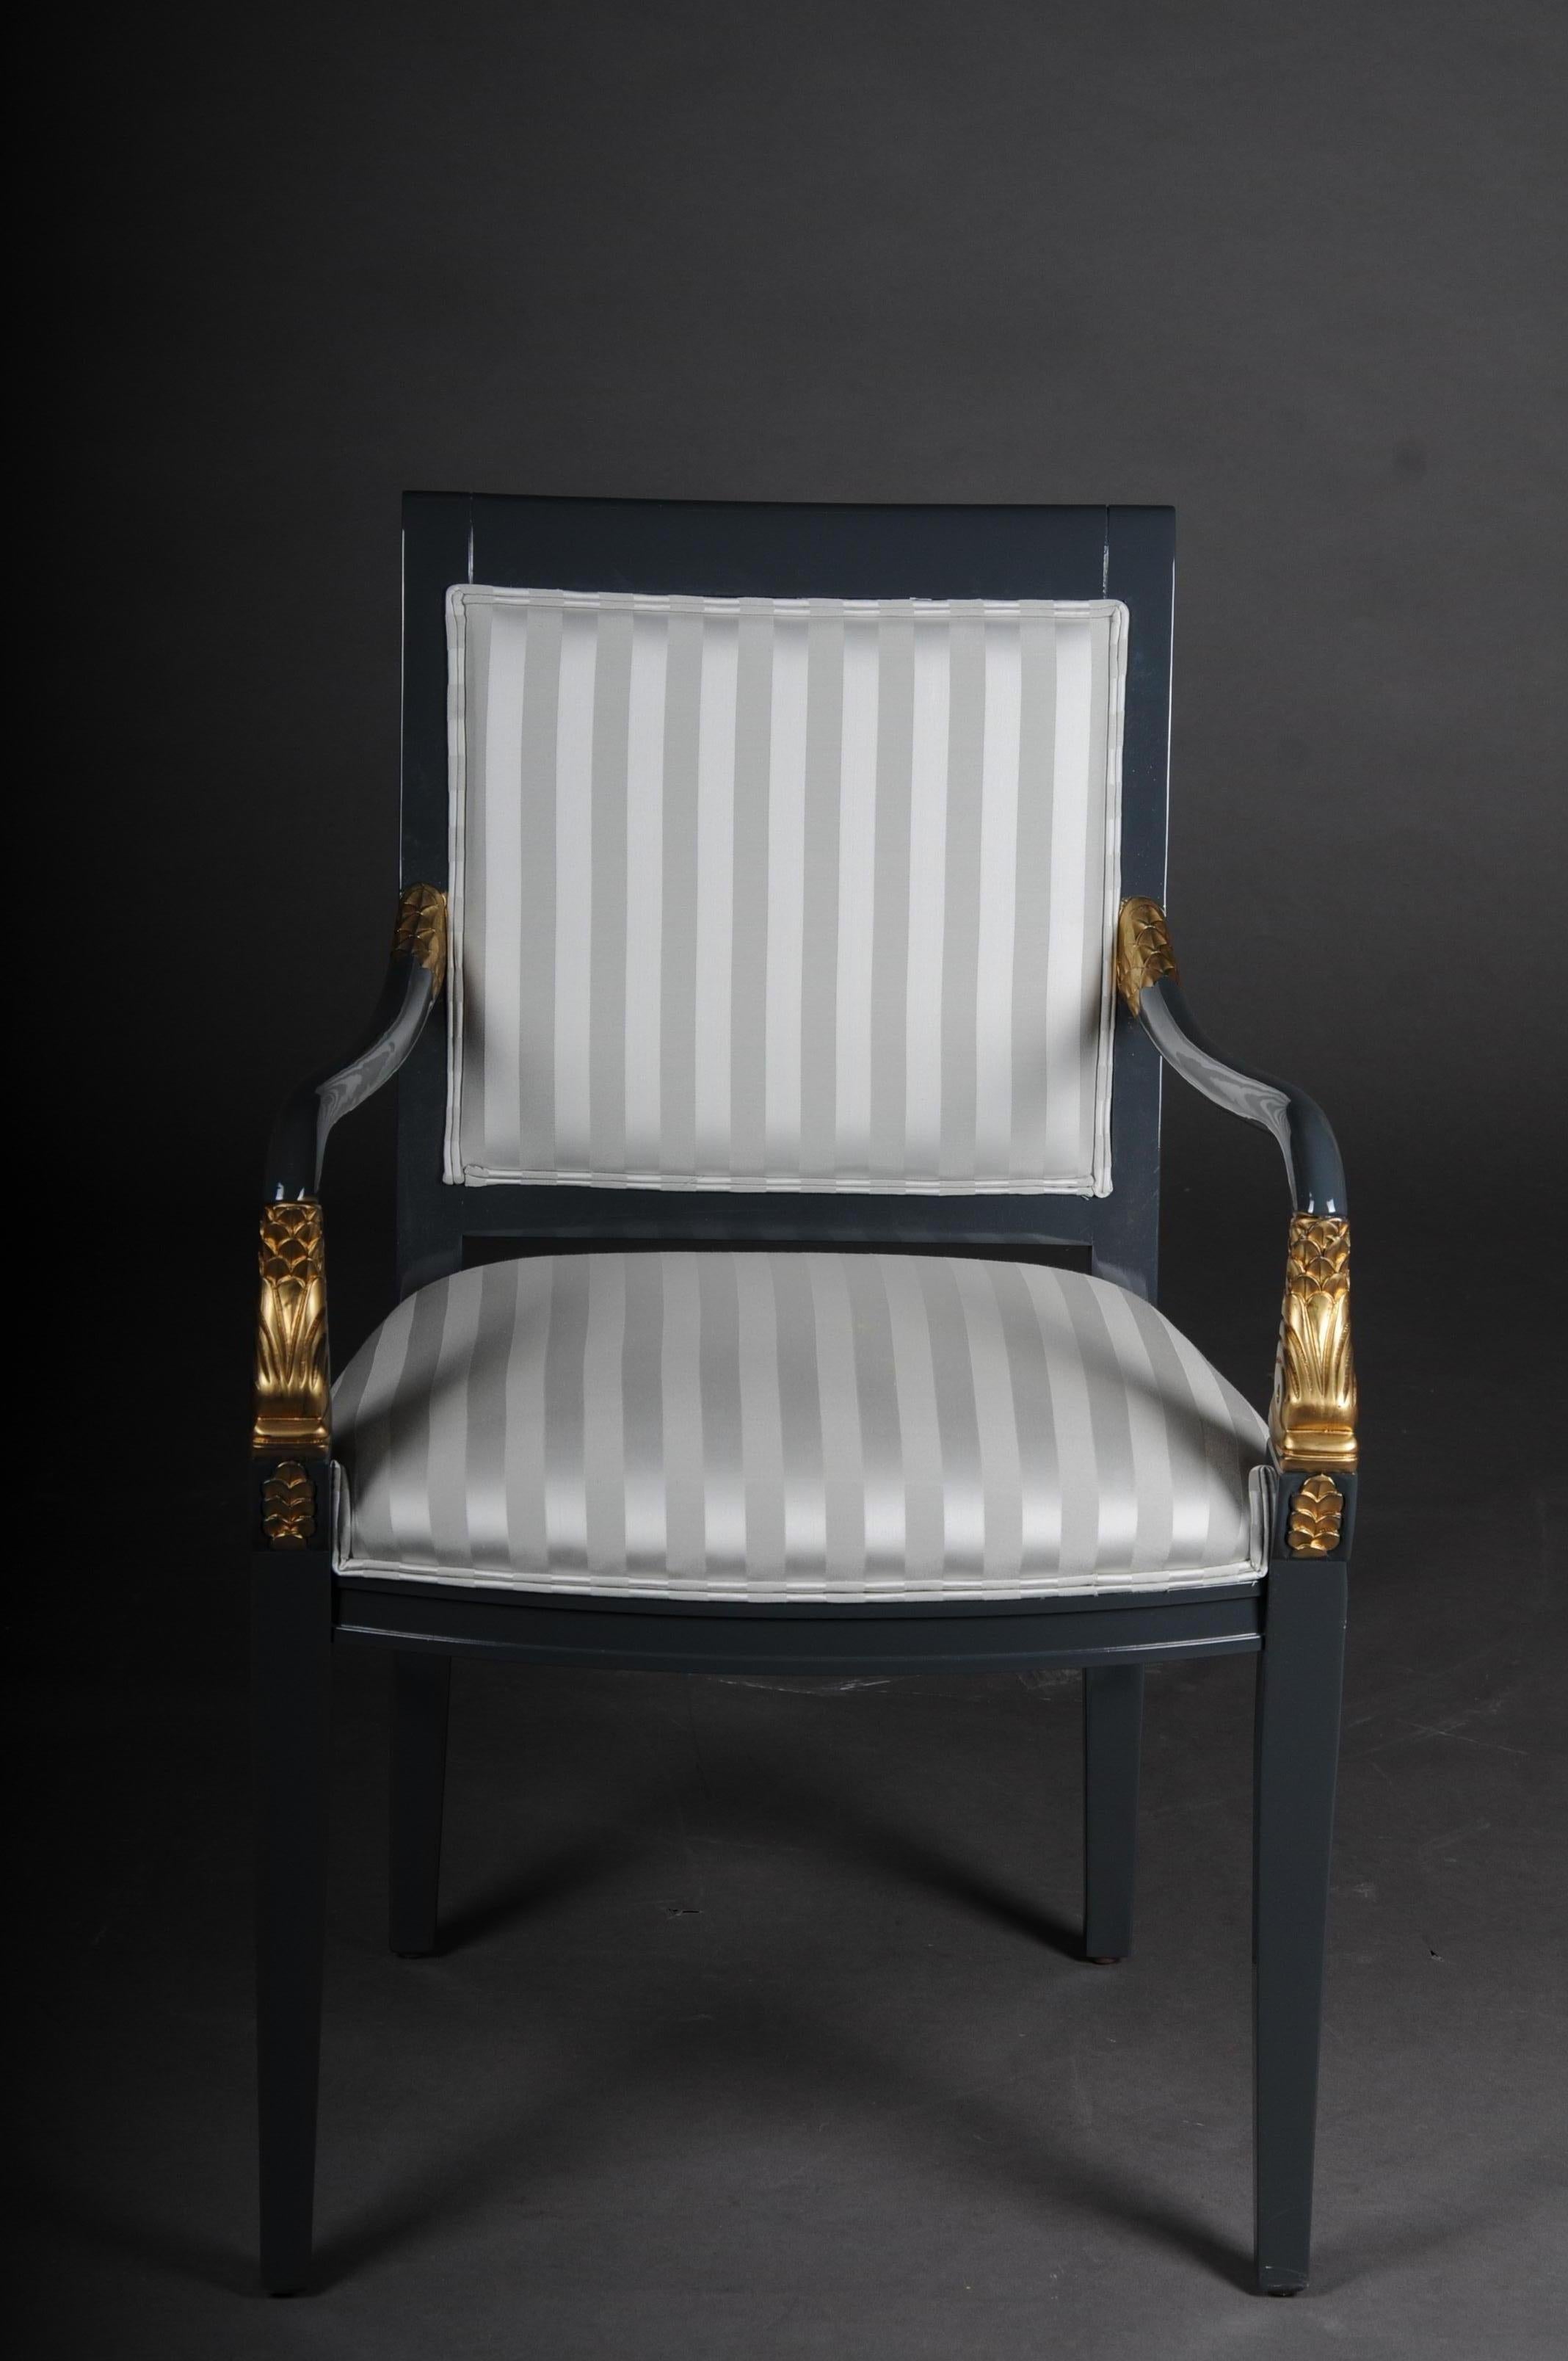 Set of 4 Italian designer armchairs Empire style, 20th century

Solid wood frame, painted dark gray, partly decorated with gold. With dolphin application. Extremely high quality workmanship. Upholstered seat made of high quality fabric. Seat and